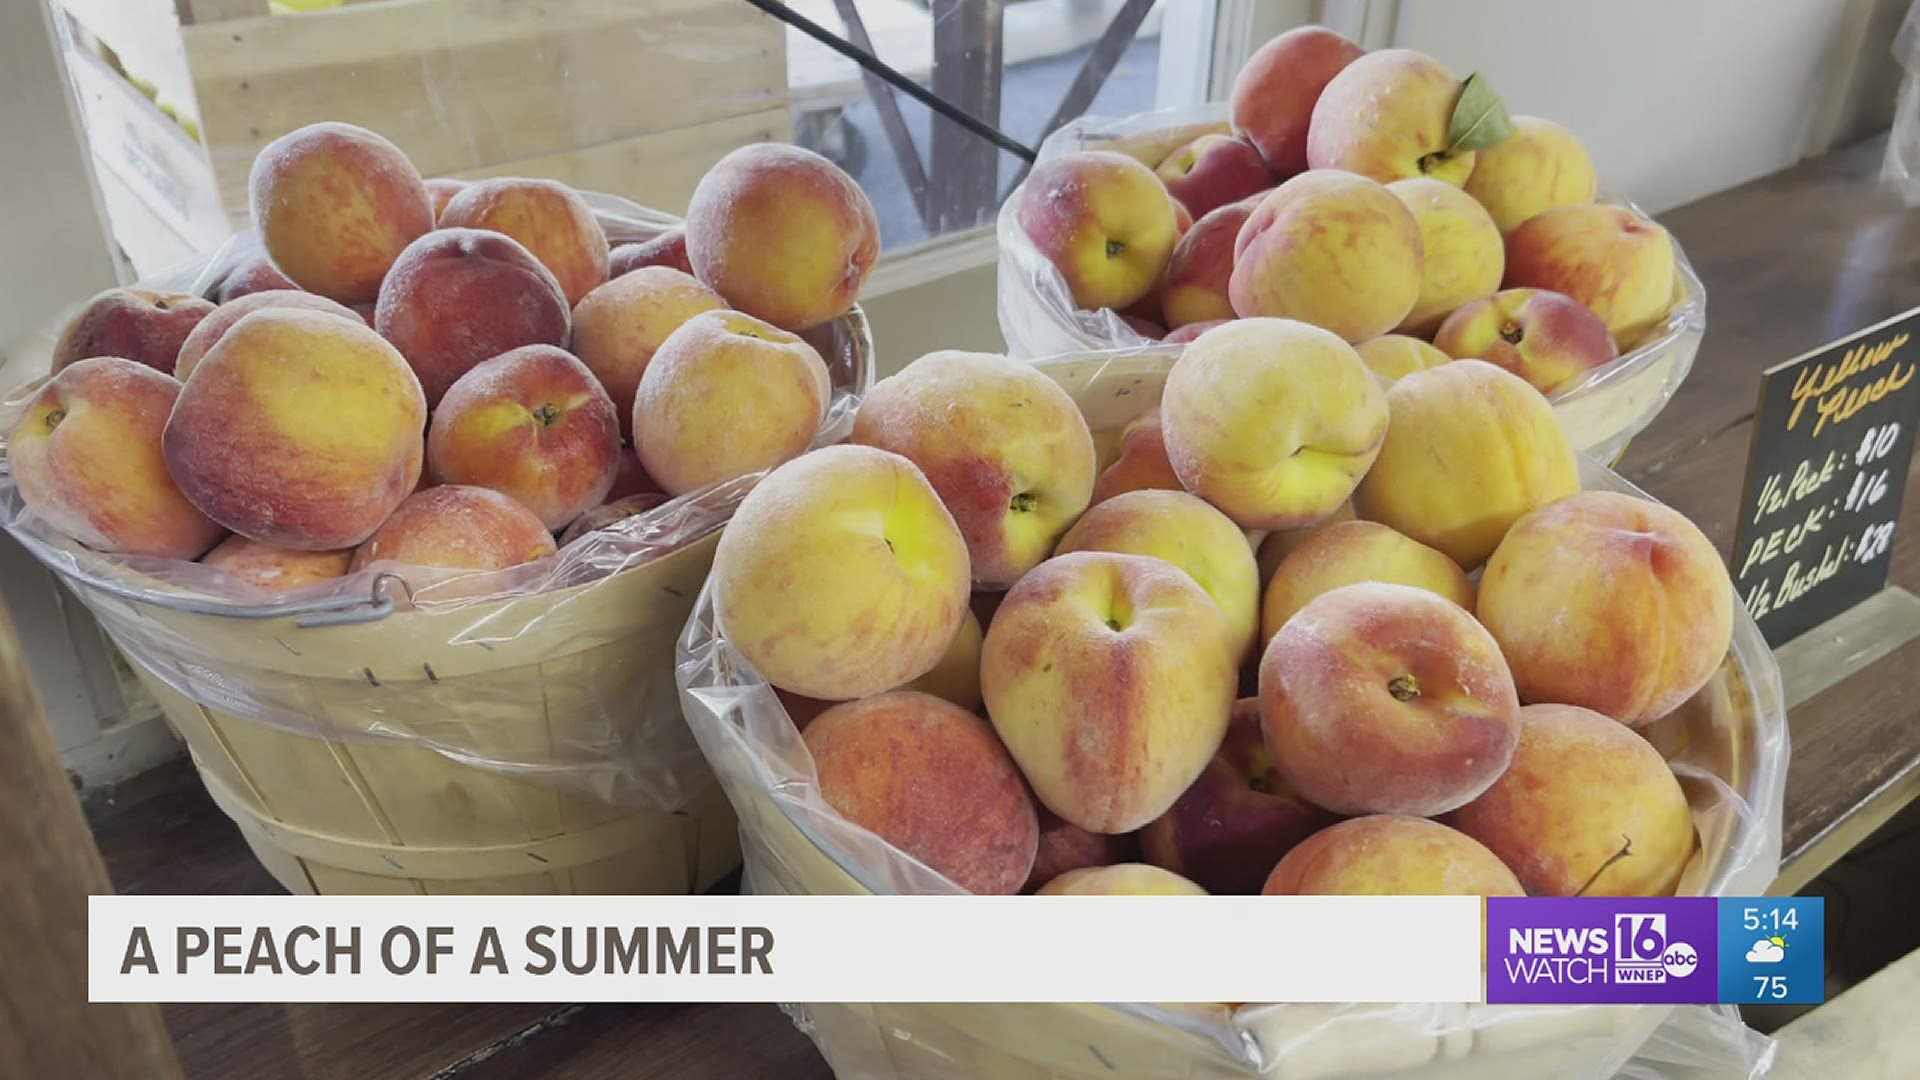 This spring included a few close calls for farmers, but now that it's almost harvest time, peach farmers say Mother Nature has sided with them this year.